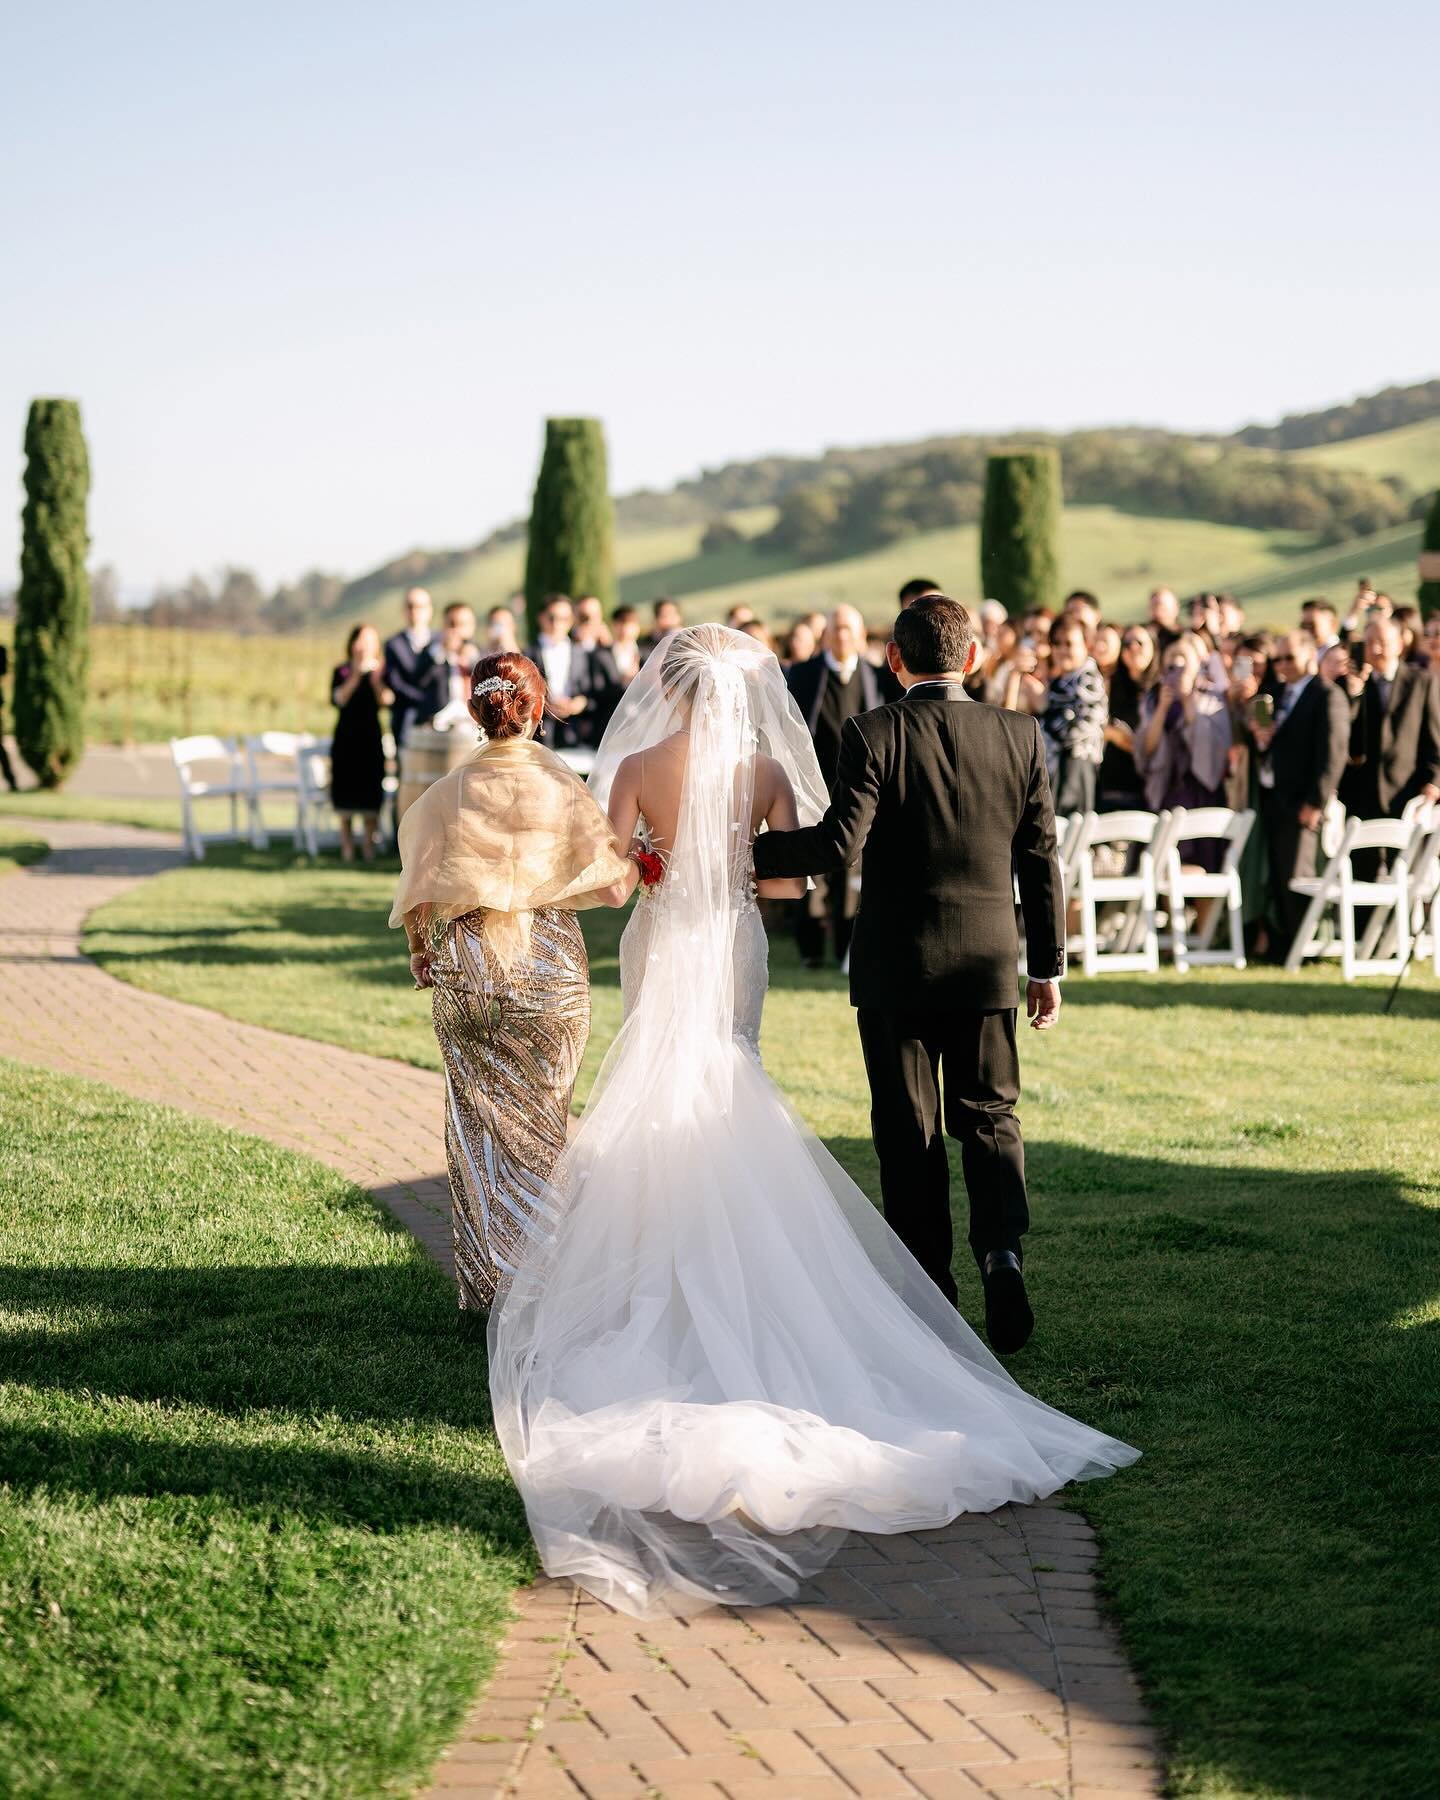 💍 I&rsquo;m still reveling in the magic of that Sonoma wedding! It was such a joy to discover such a stunning location. And you know what? I couldn&rsquo;t resist returning as a guest to Viansa Sonoma just to savor their exquisite wine and soak in t